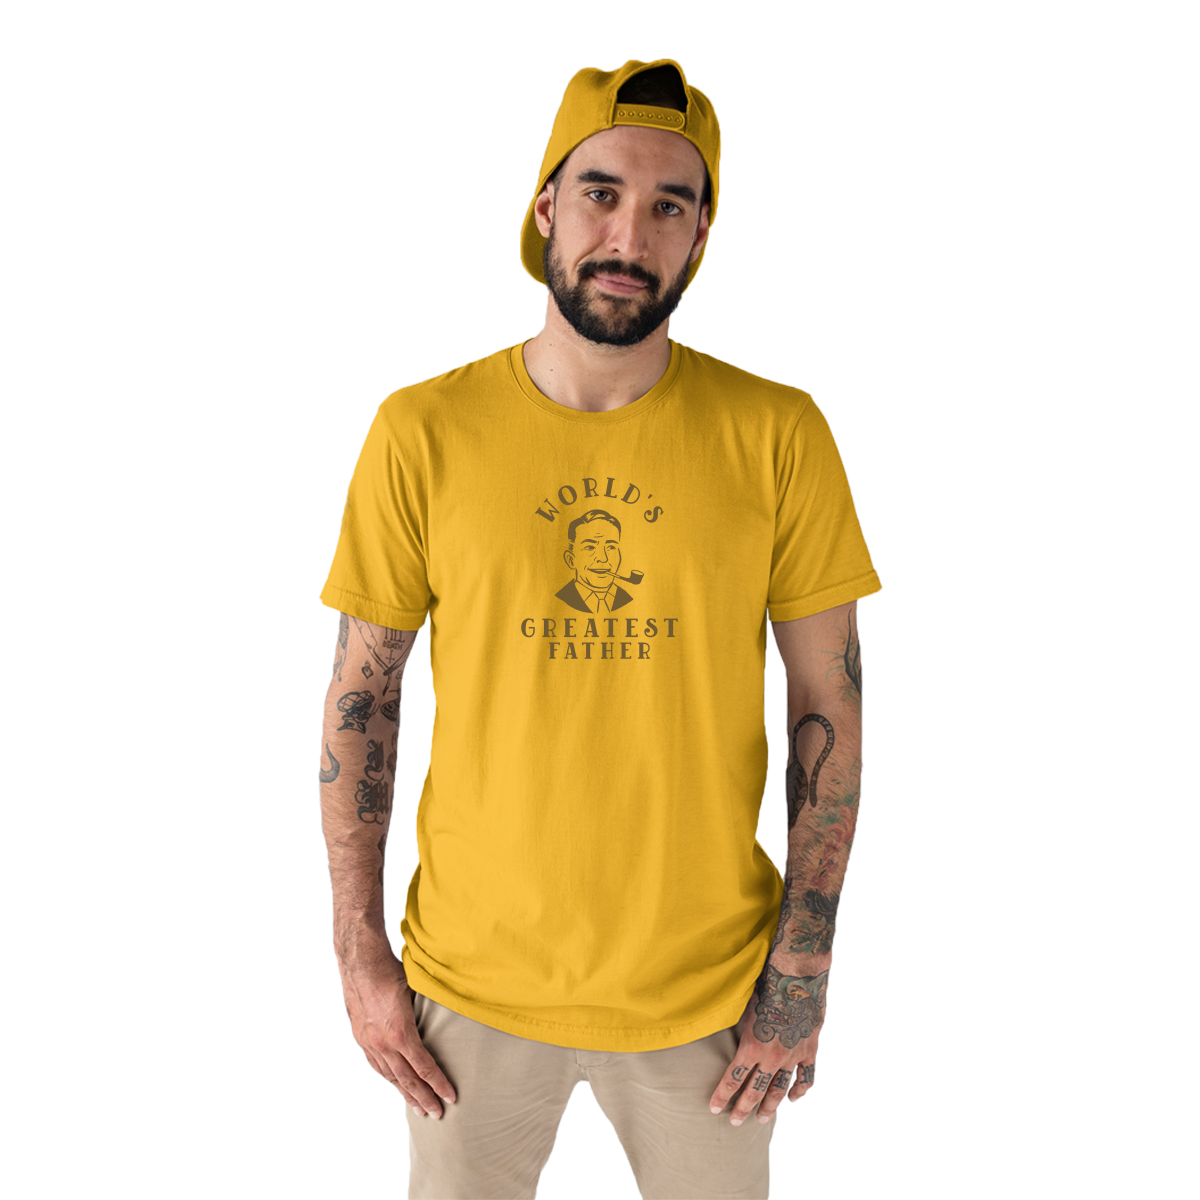 World's Greatest Father Men's T-shirt | Yellow